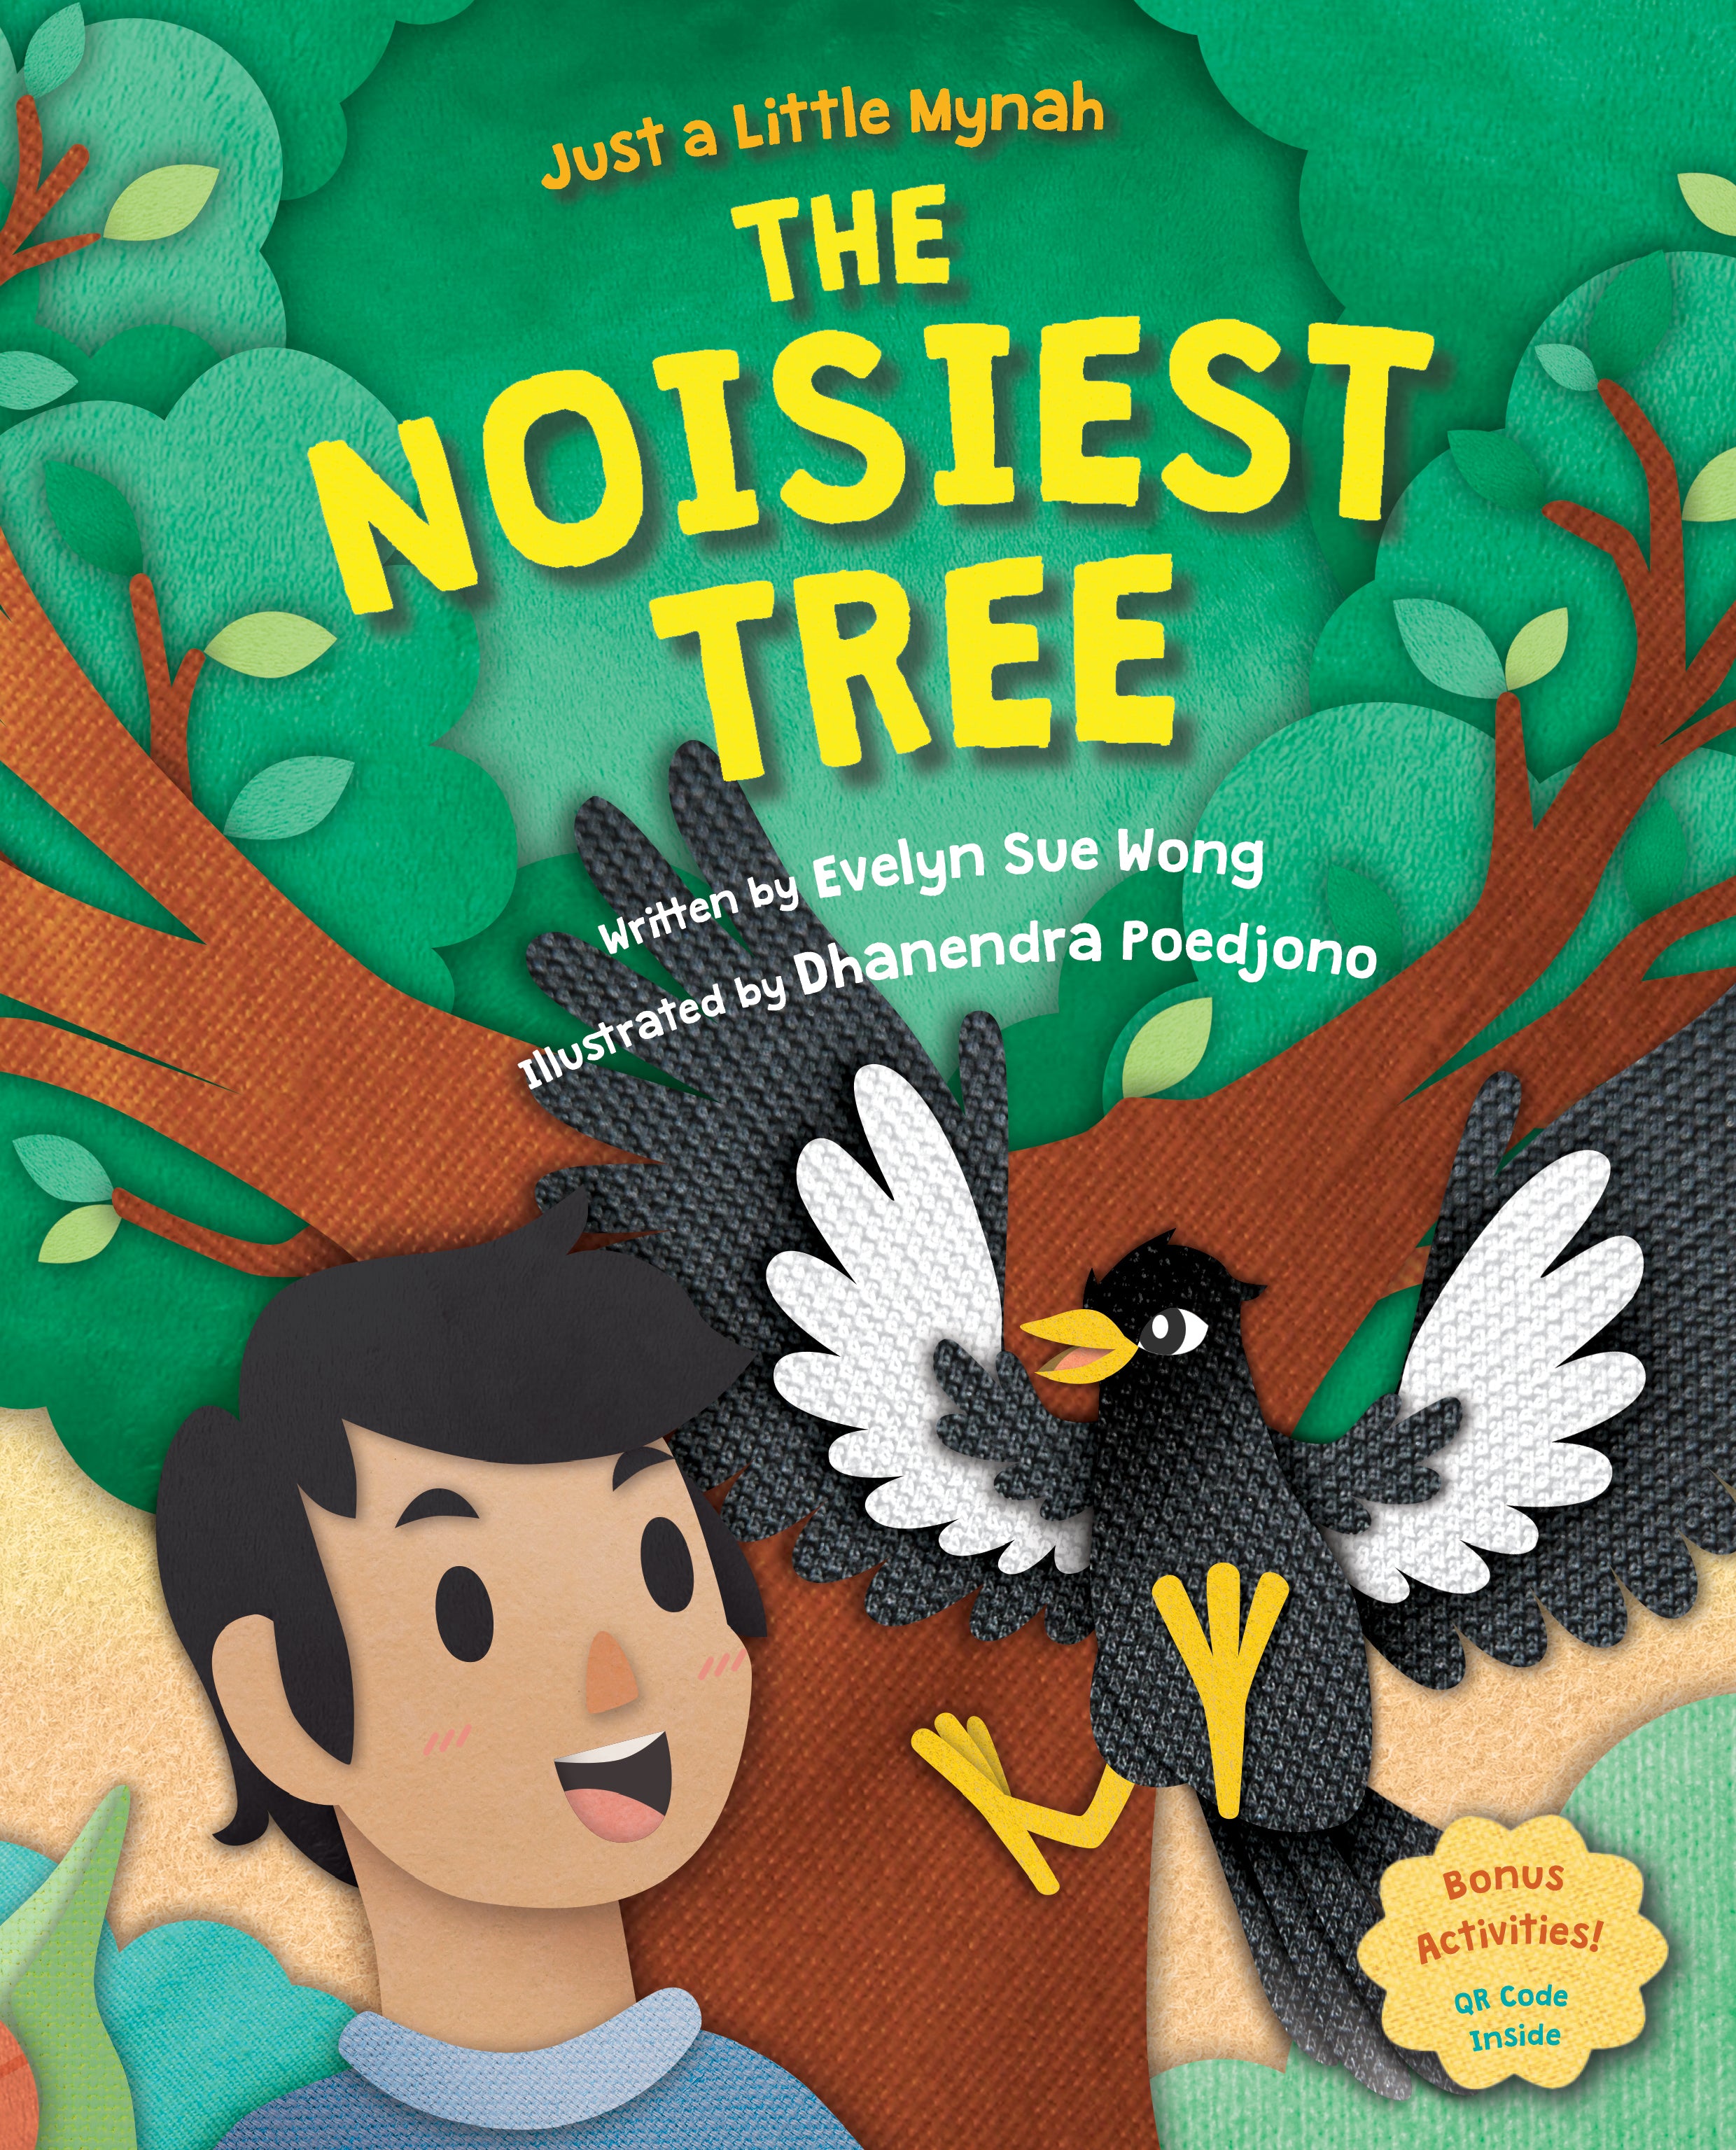 Just a Little Mynah: The Noisiest Tree